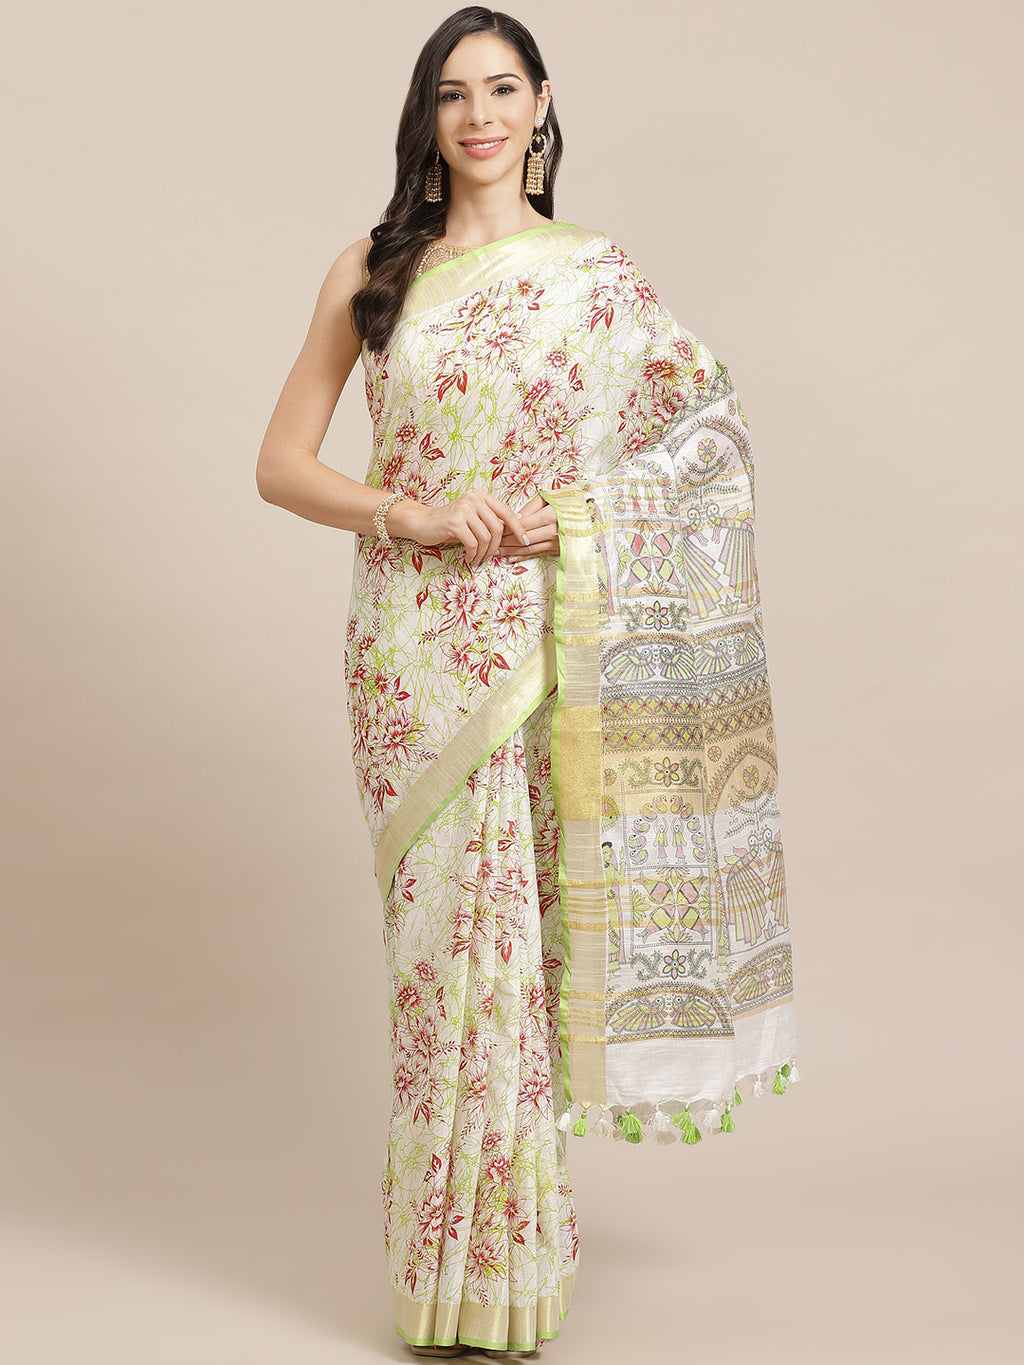 Off White and Green, Kalakari India Bhagalpuri Linen Blend Woven Design Saree with Blouse ALBGSA0146-Saree-Kalakari India-ALBGSA0146-Cotton, Geographical Indication, Hand Crafted, Heritage Prints, Linen, Natural Dyes, Red, Sarees, Shibori, Sustainable Fabrics, Woven, Yellow-[Linen,Ethnic,wear,Fashionista,Handloom,Handicraft,Indigo,blockprint,block,print,Cotton,Chanderi,Blue, latest,classy,party,bollywood,trendy,summer,style,traditional,formal,elegant,unique,style,hand,block,print, dabu,booti,gif